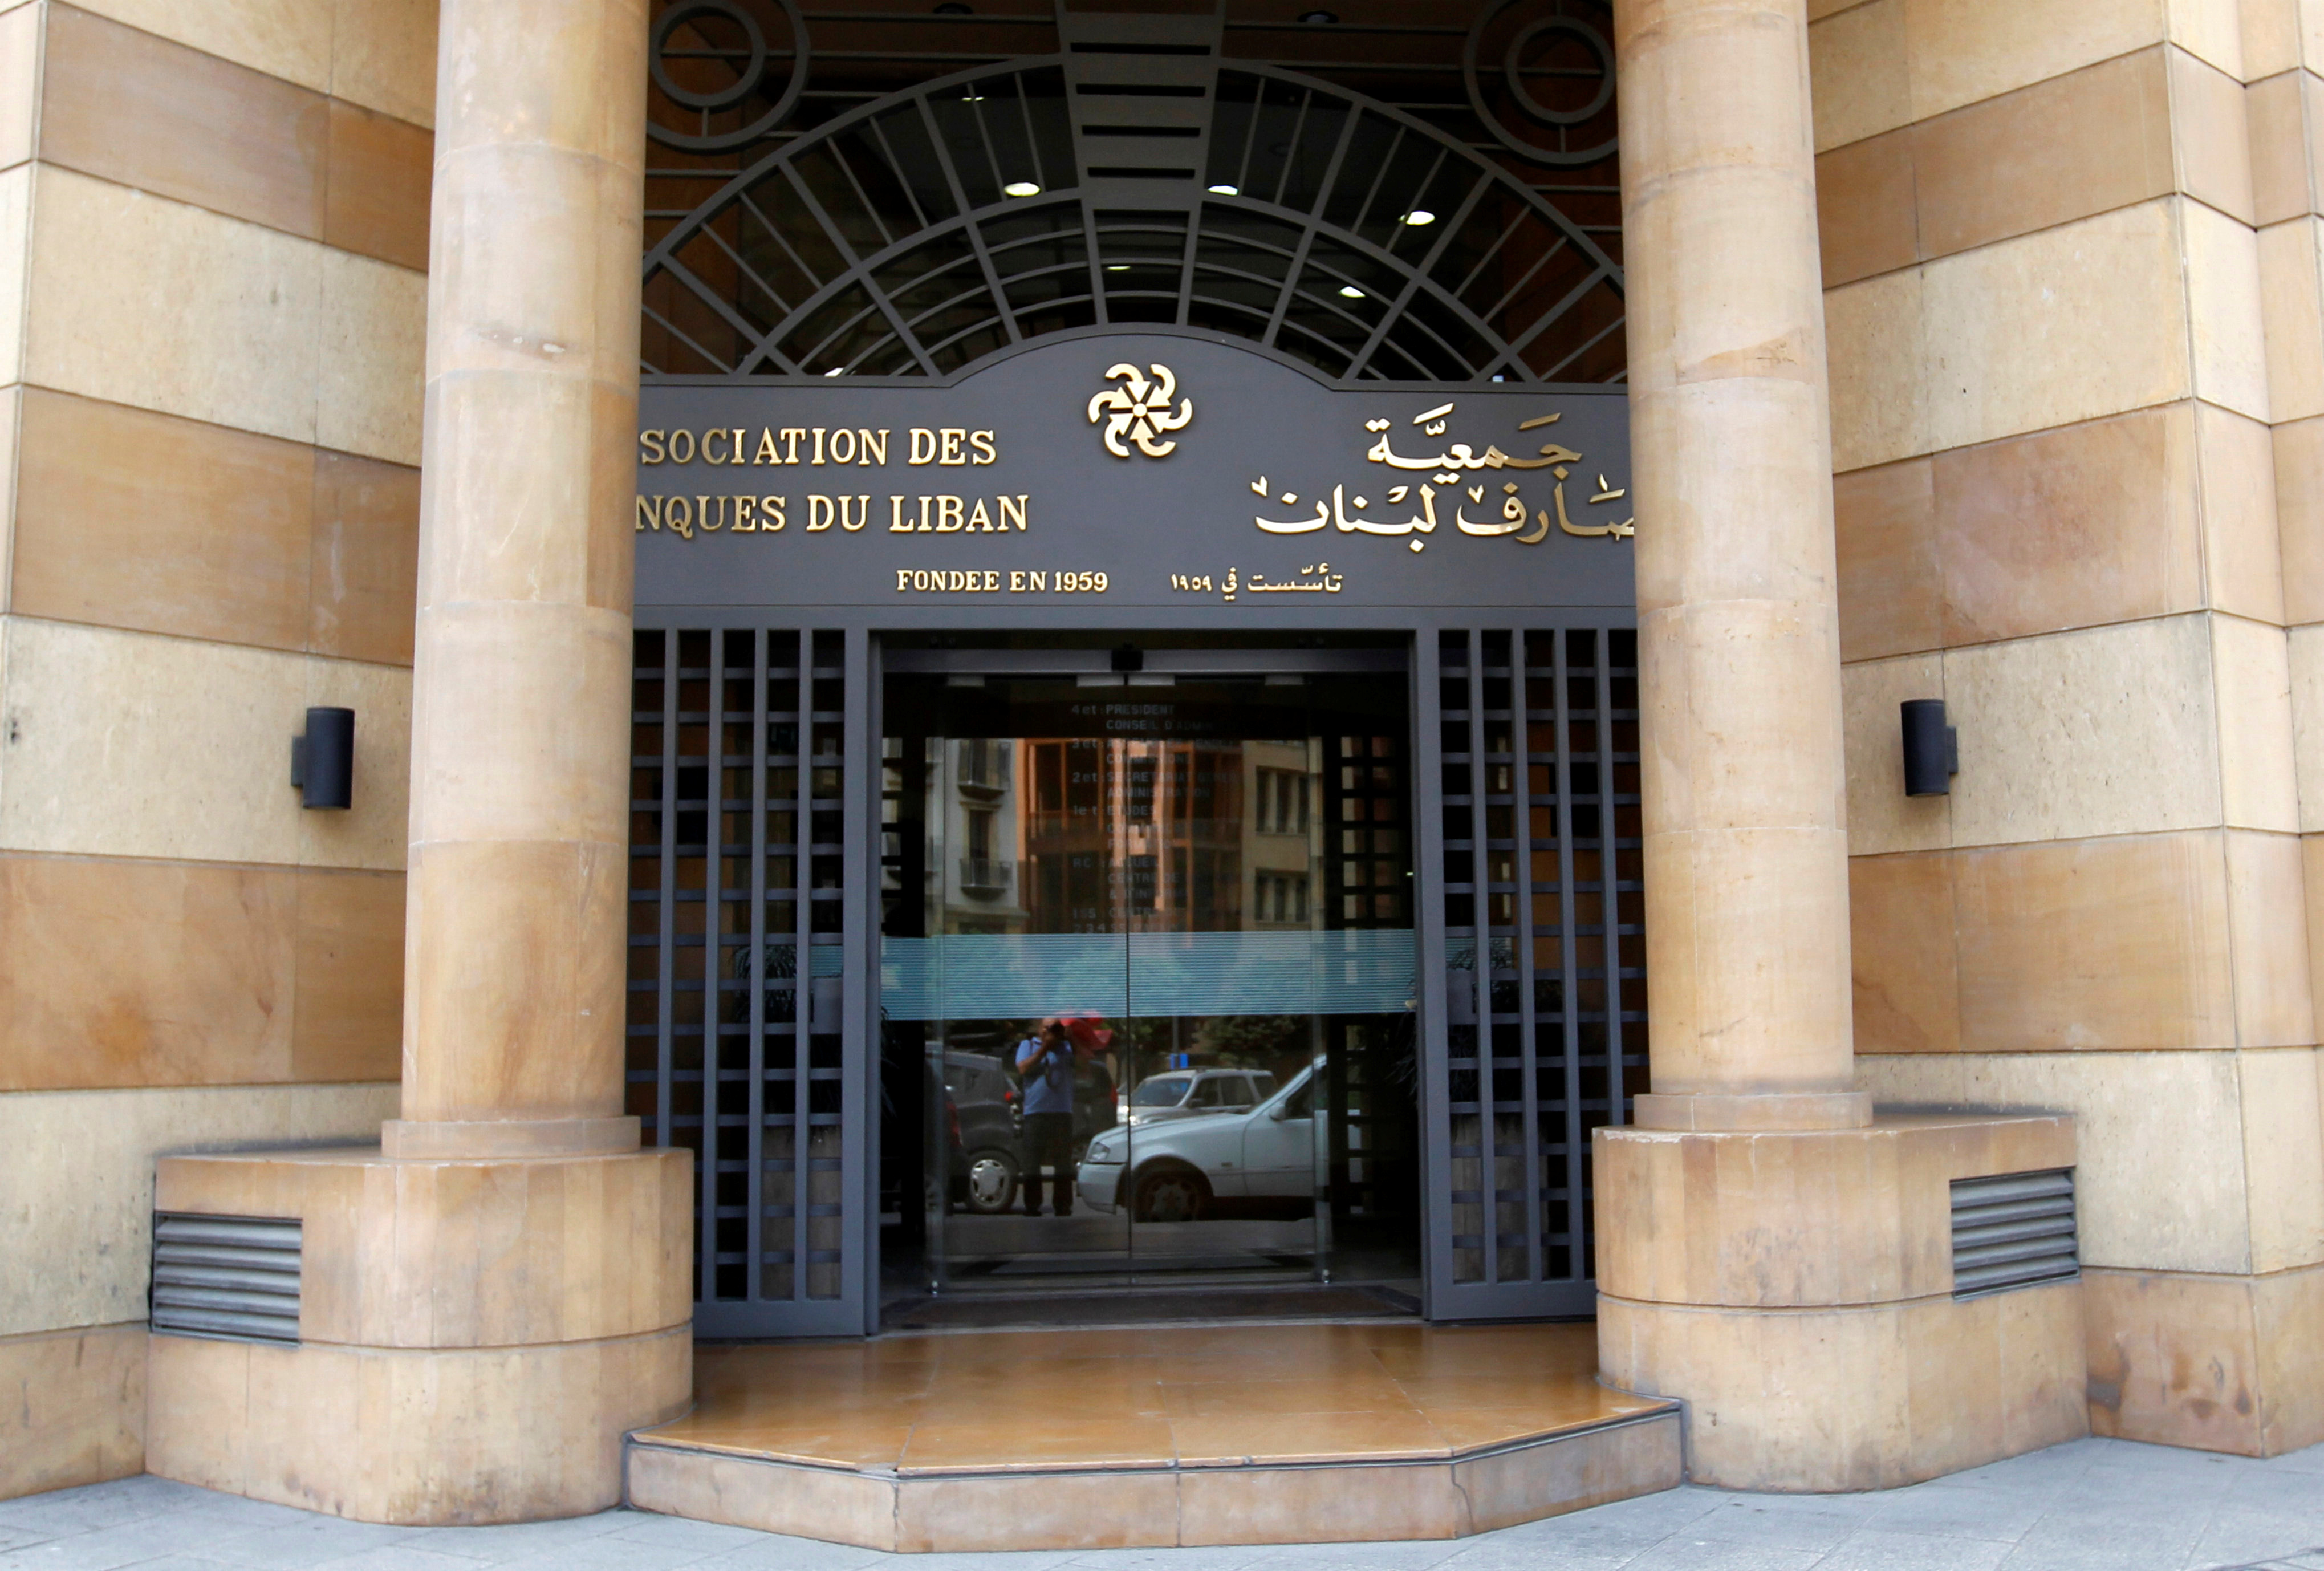 Association of Banks in Lebanon building is pictured in downtown Beirut